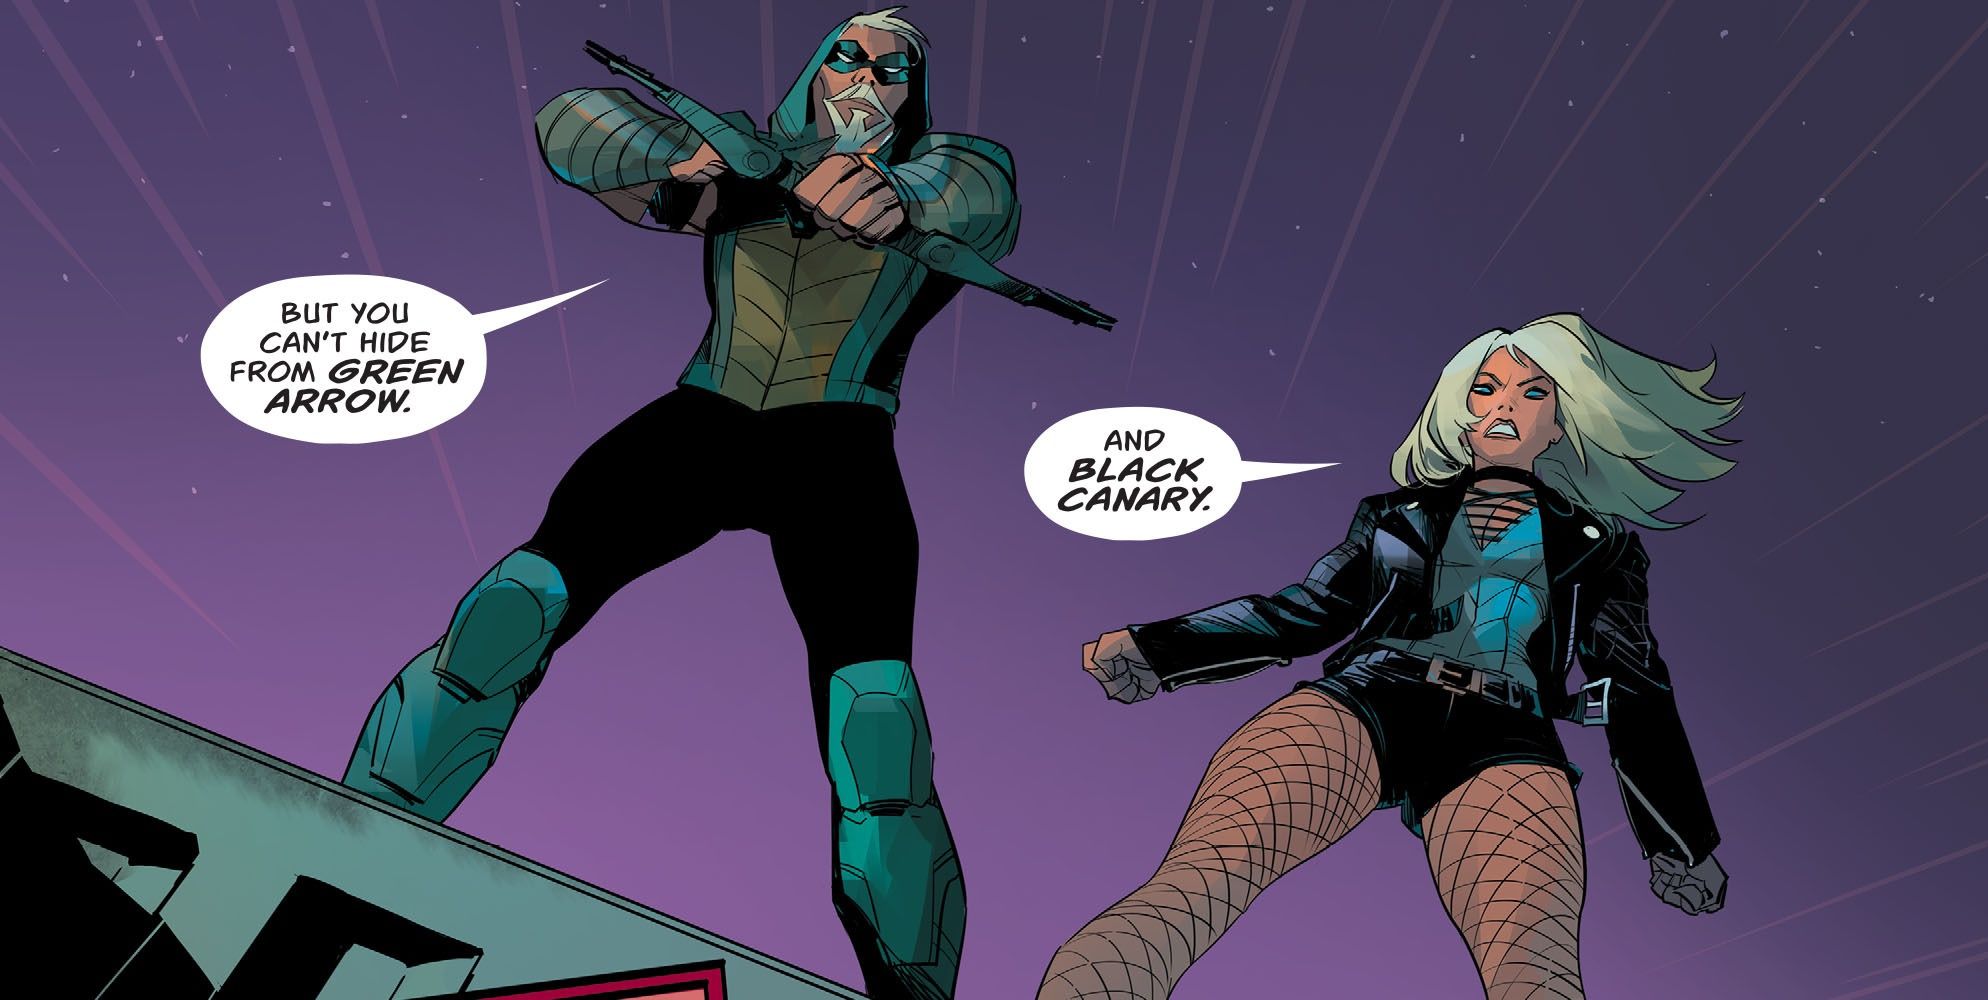 New Black Canary from DC Comics